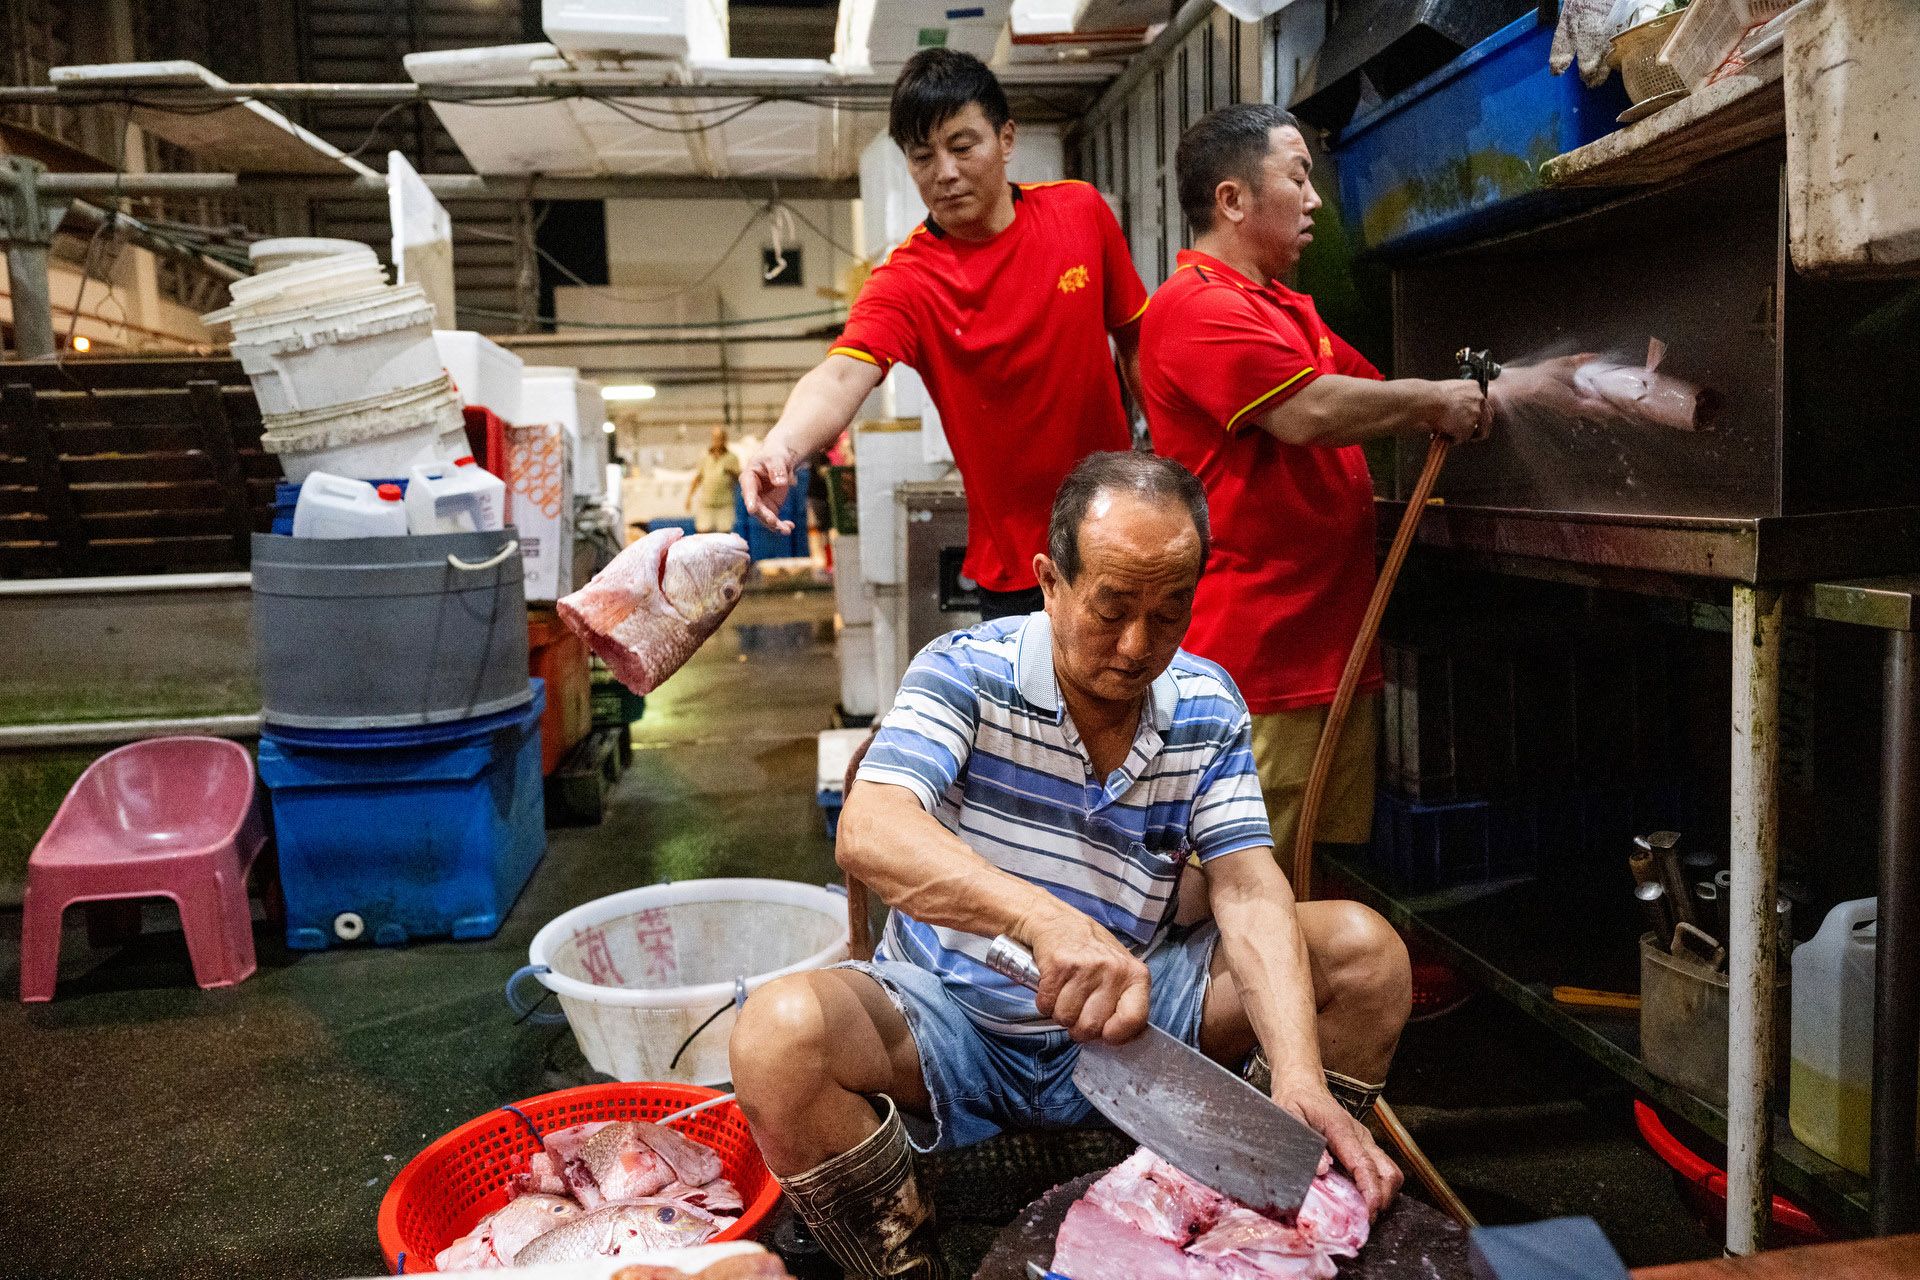 Mr Low Swee Hua (in blue), 64, cutting a fish, while two workers prepared the fish for packaging.